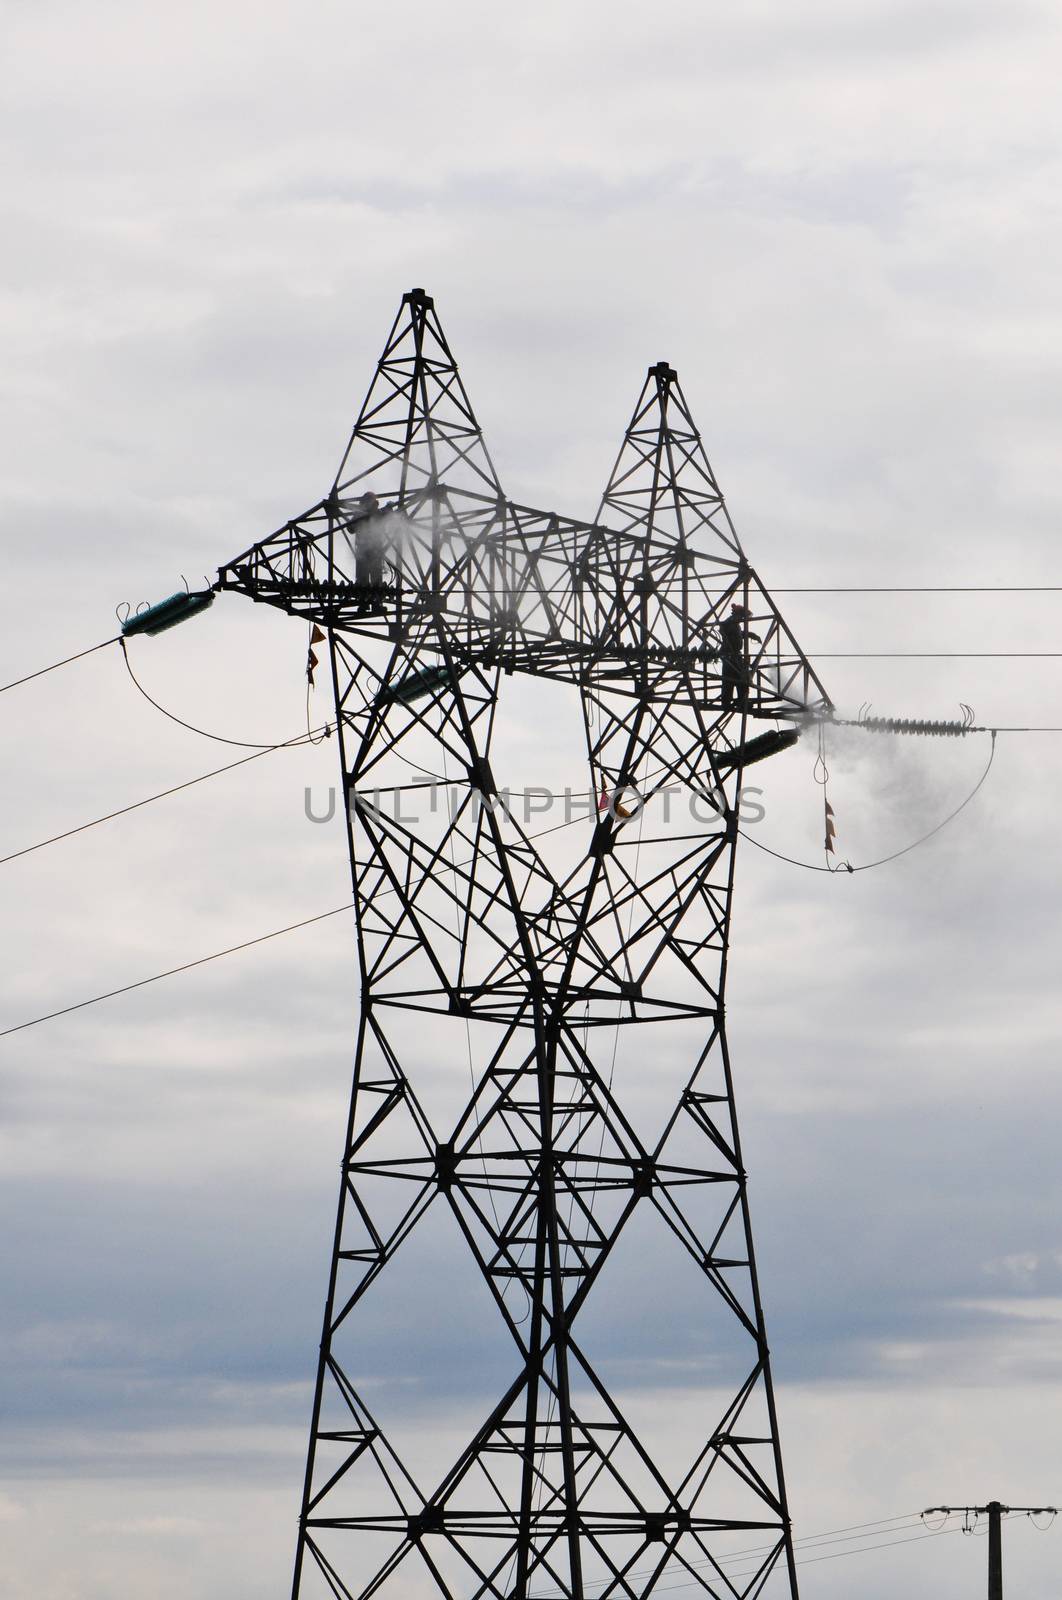 Two Guys Cleaning Big Electrical Pylon by shkyo30